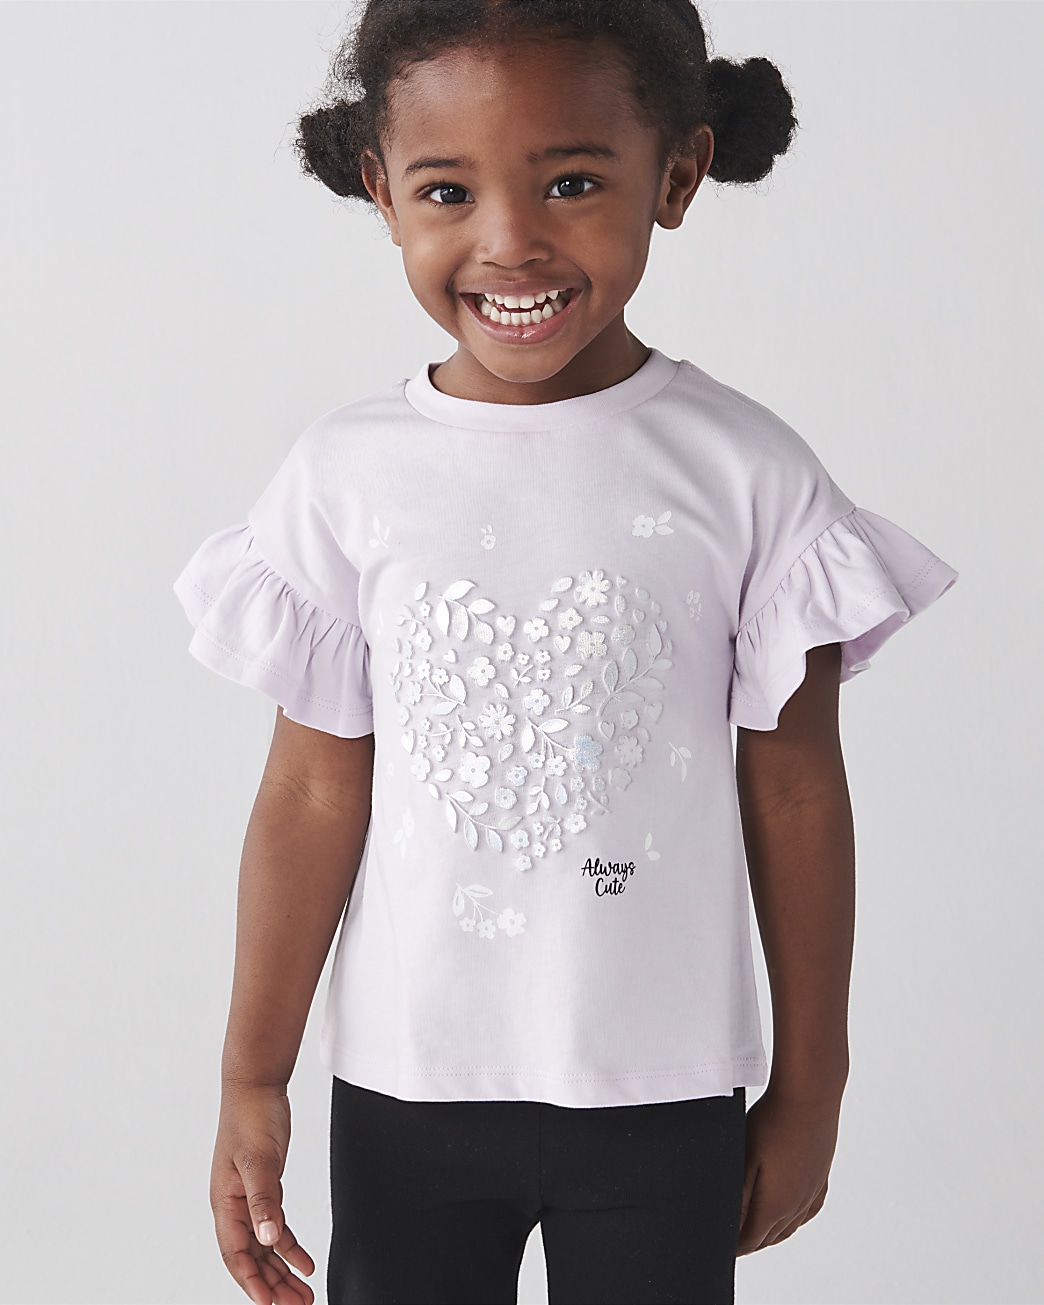 Visual filter display for Baby Girls Tops